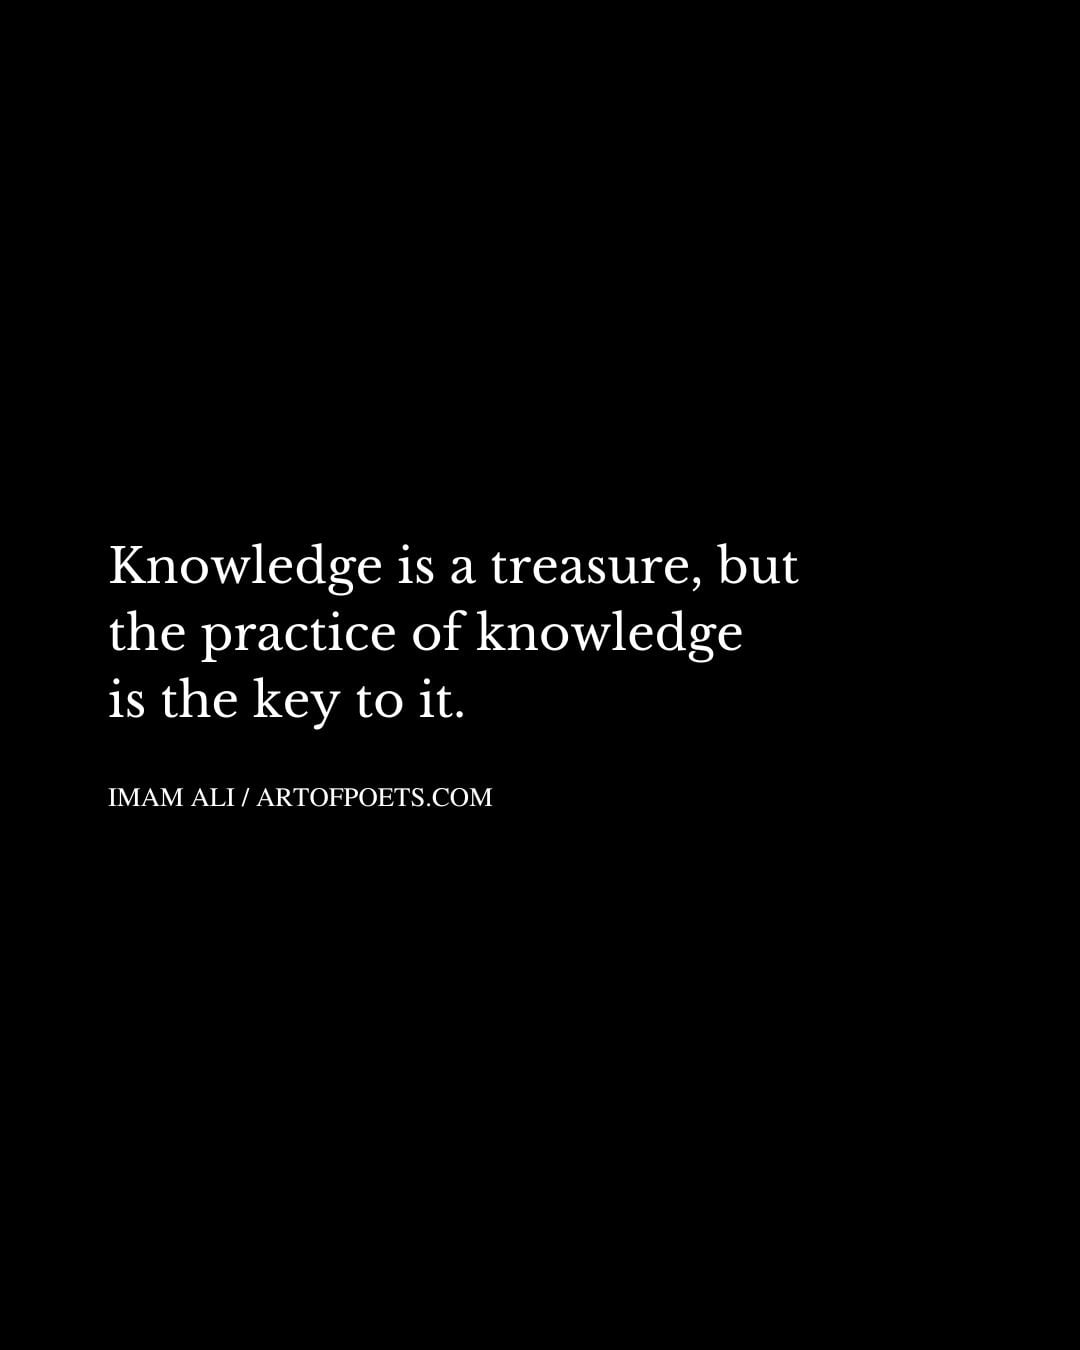 Knowledge is a treasure but the practice of knowledge is the key to it